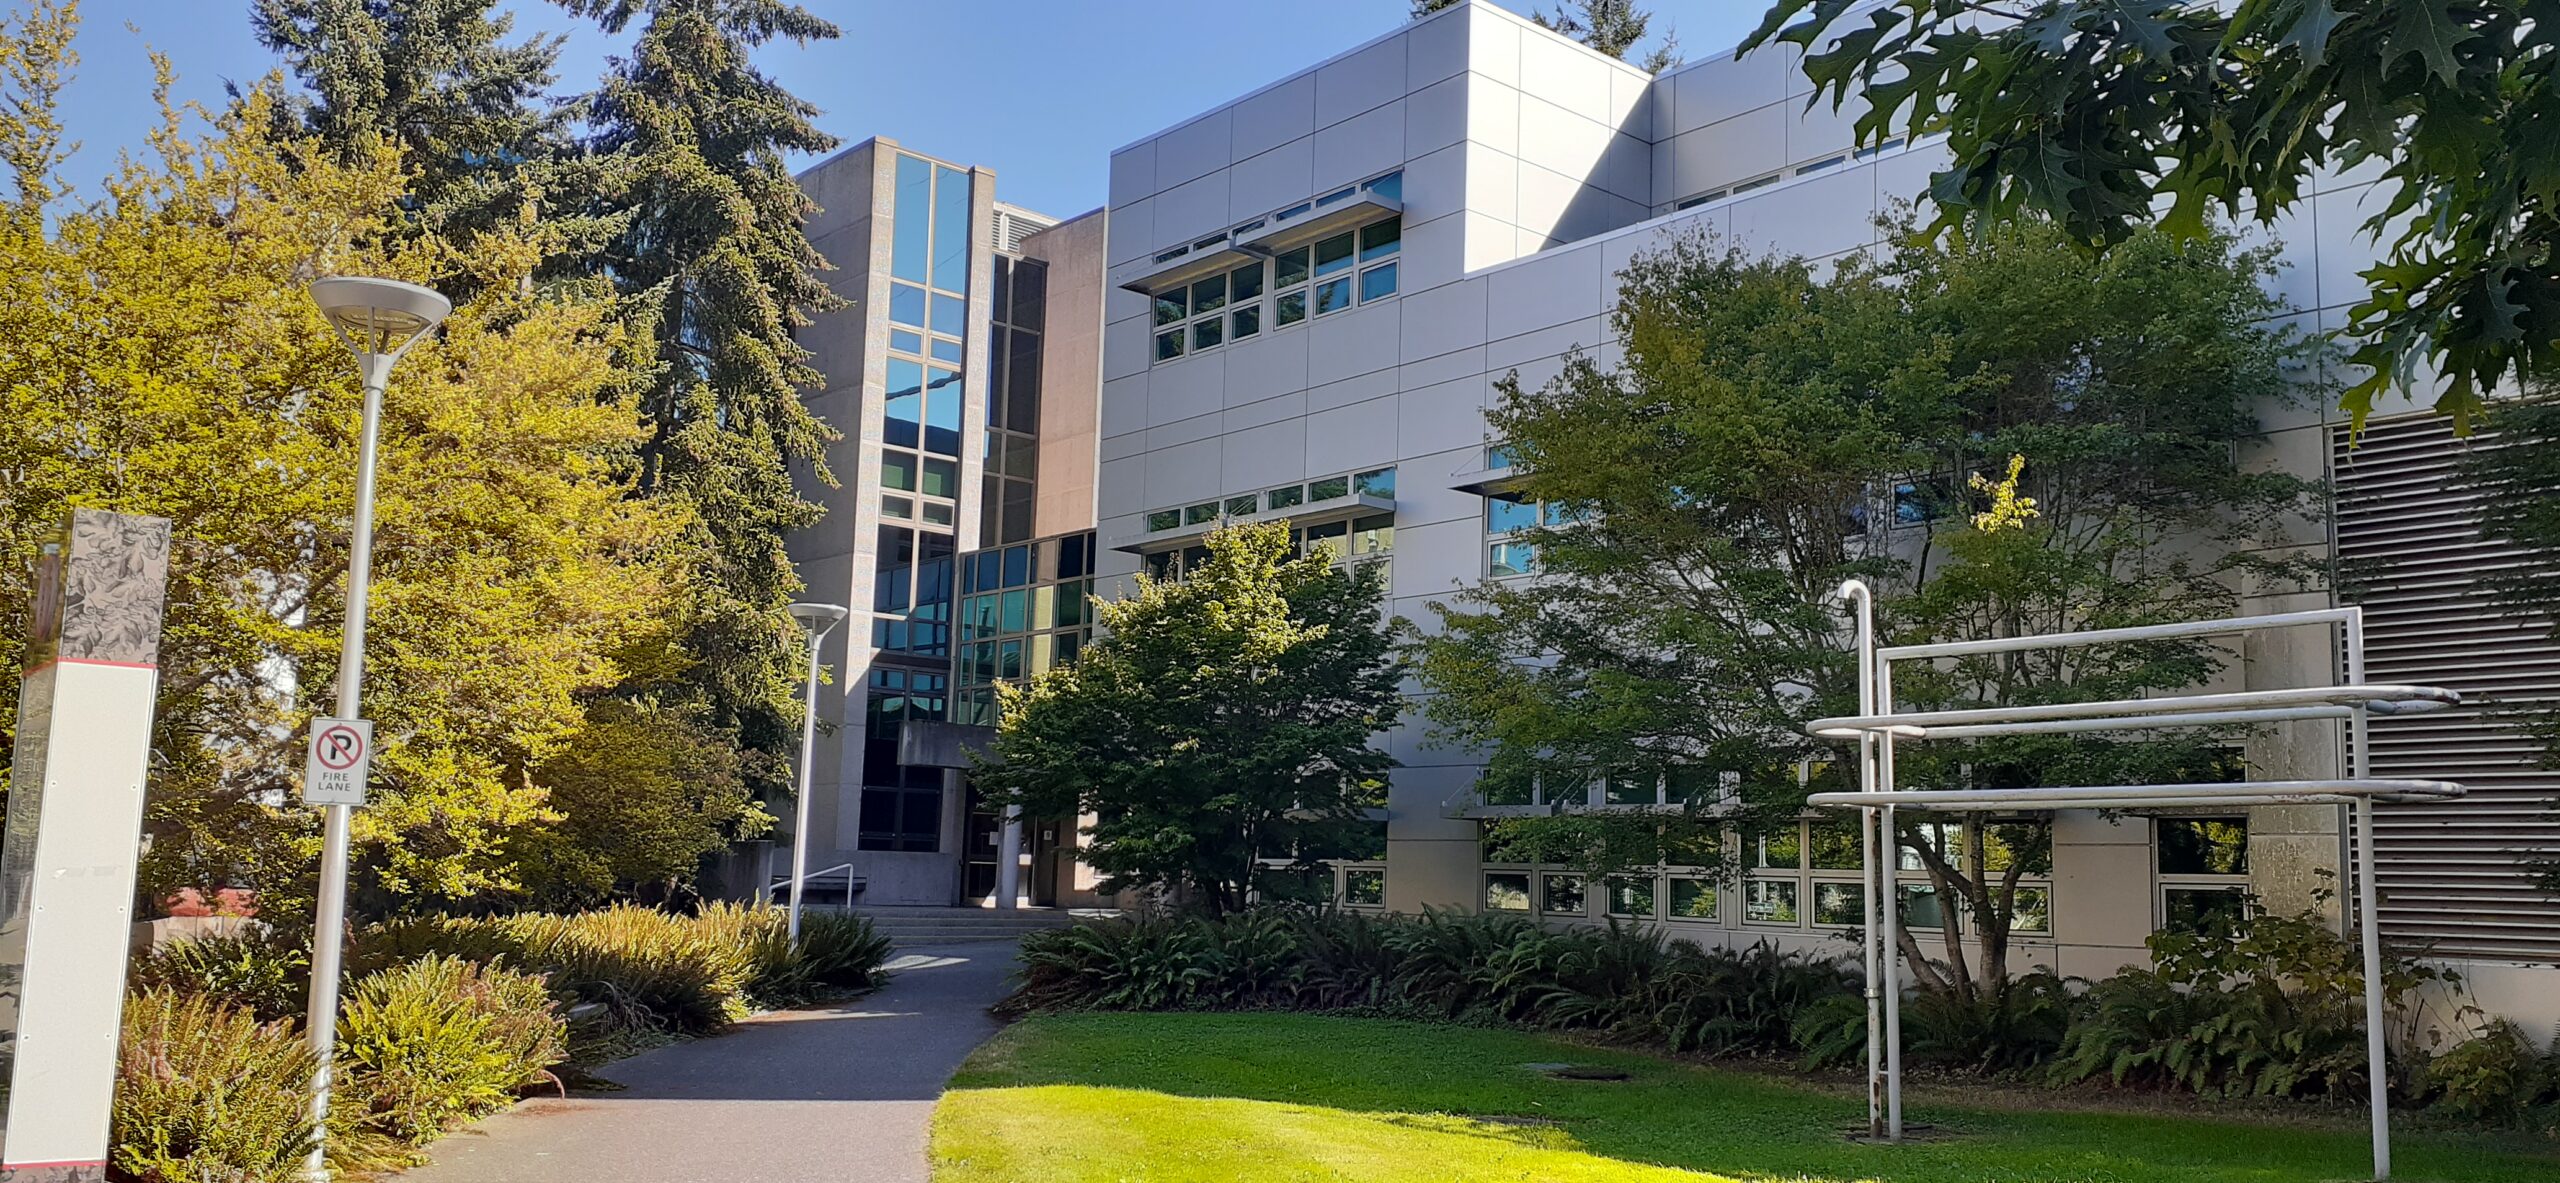 The Engineering and Computer Science building at UVic. Photo by Sie Douglas-Fish.